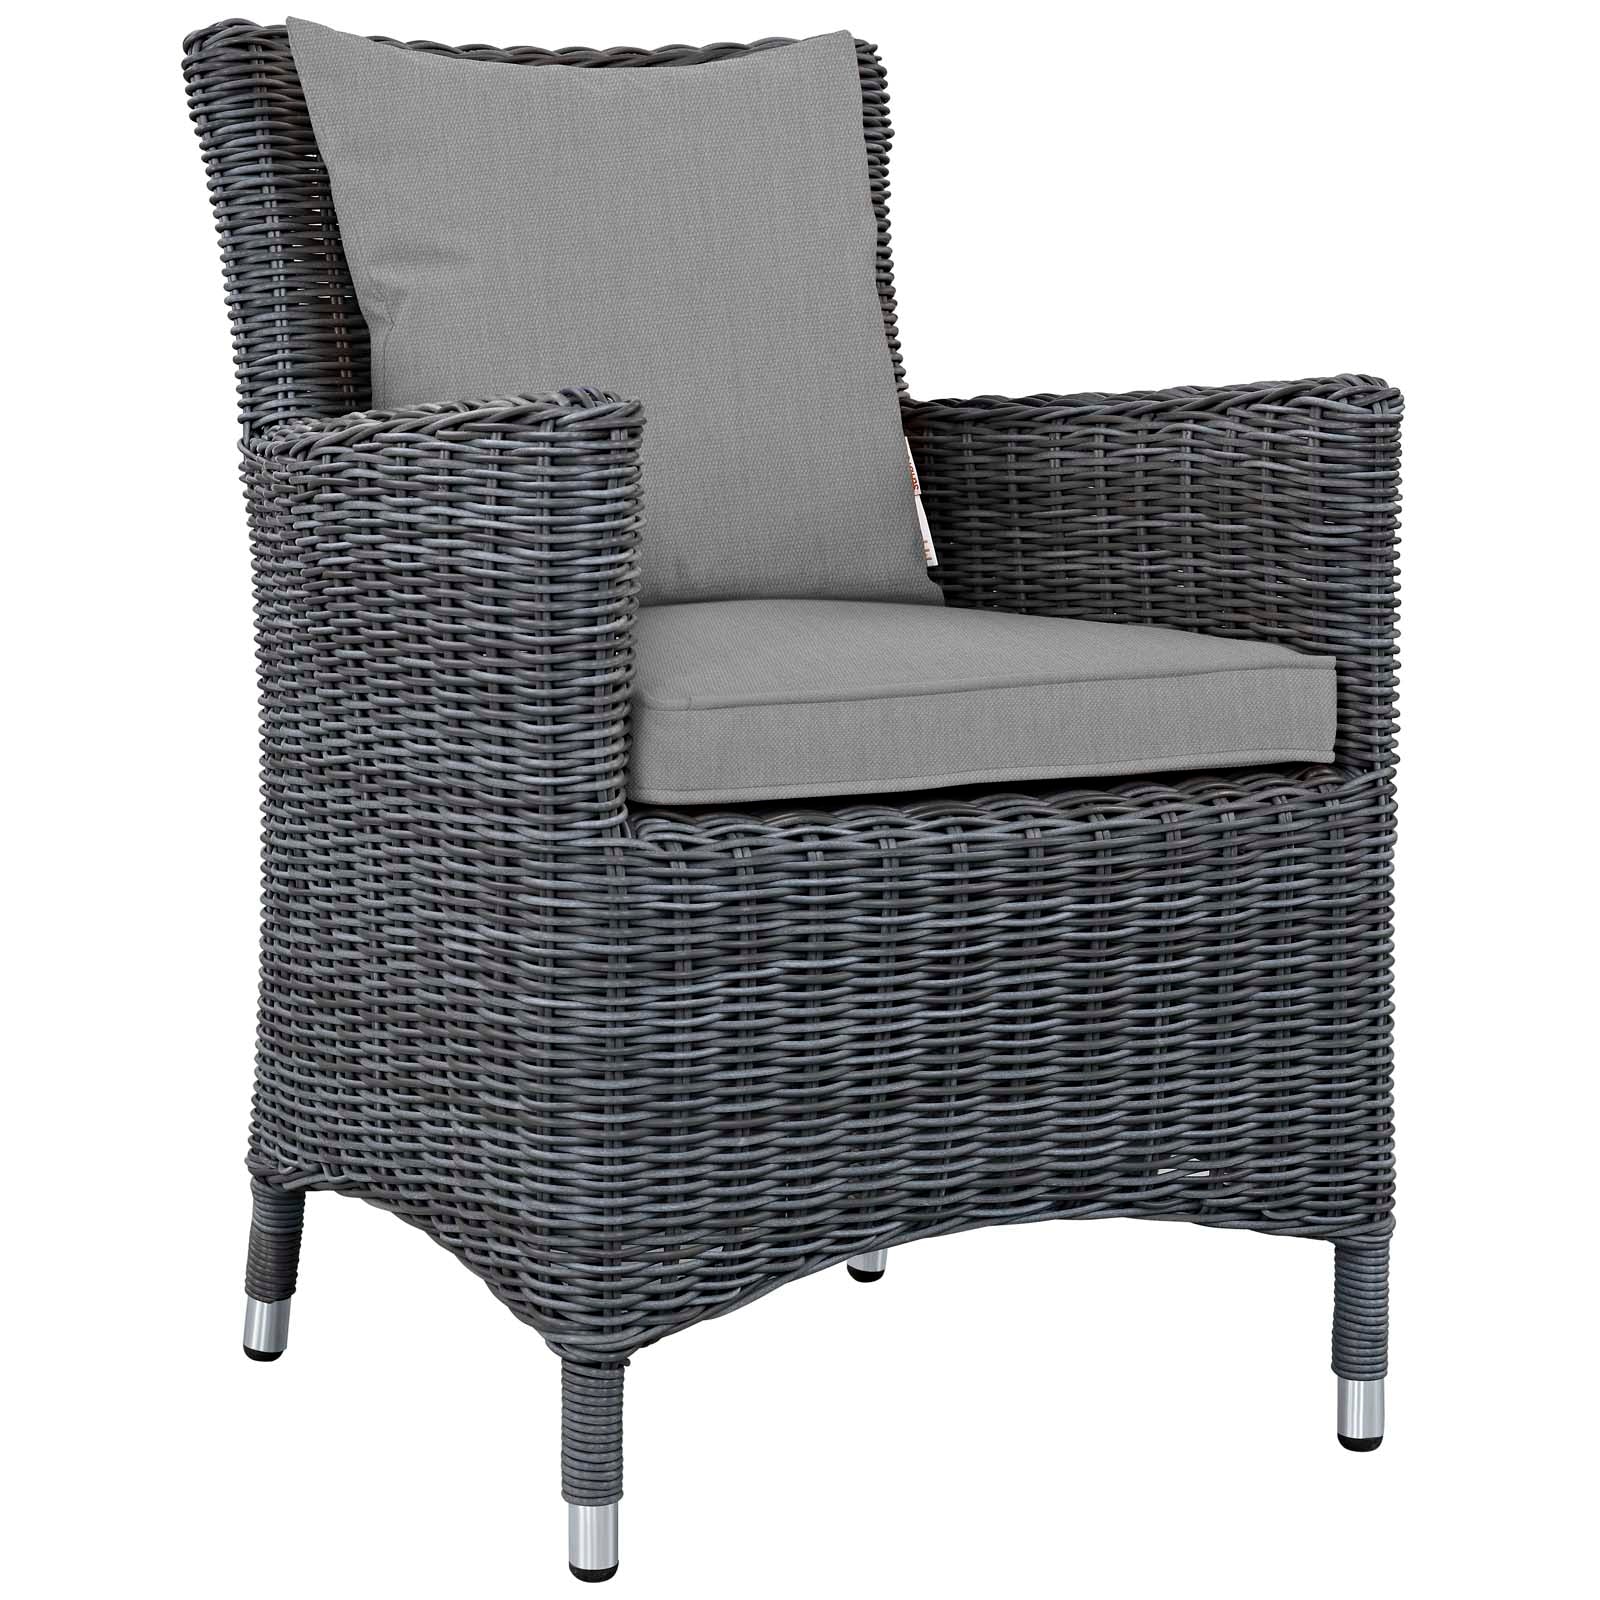 Modway Outdoor Dining Chairs - Summon Dining Outdoor Patio Sunbrella Armchair Canvas Gray